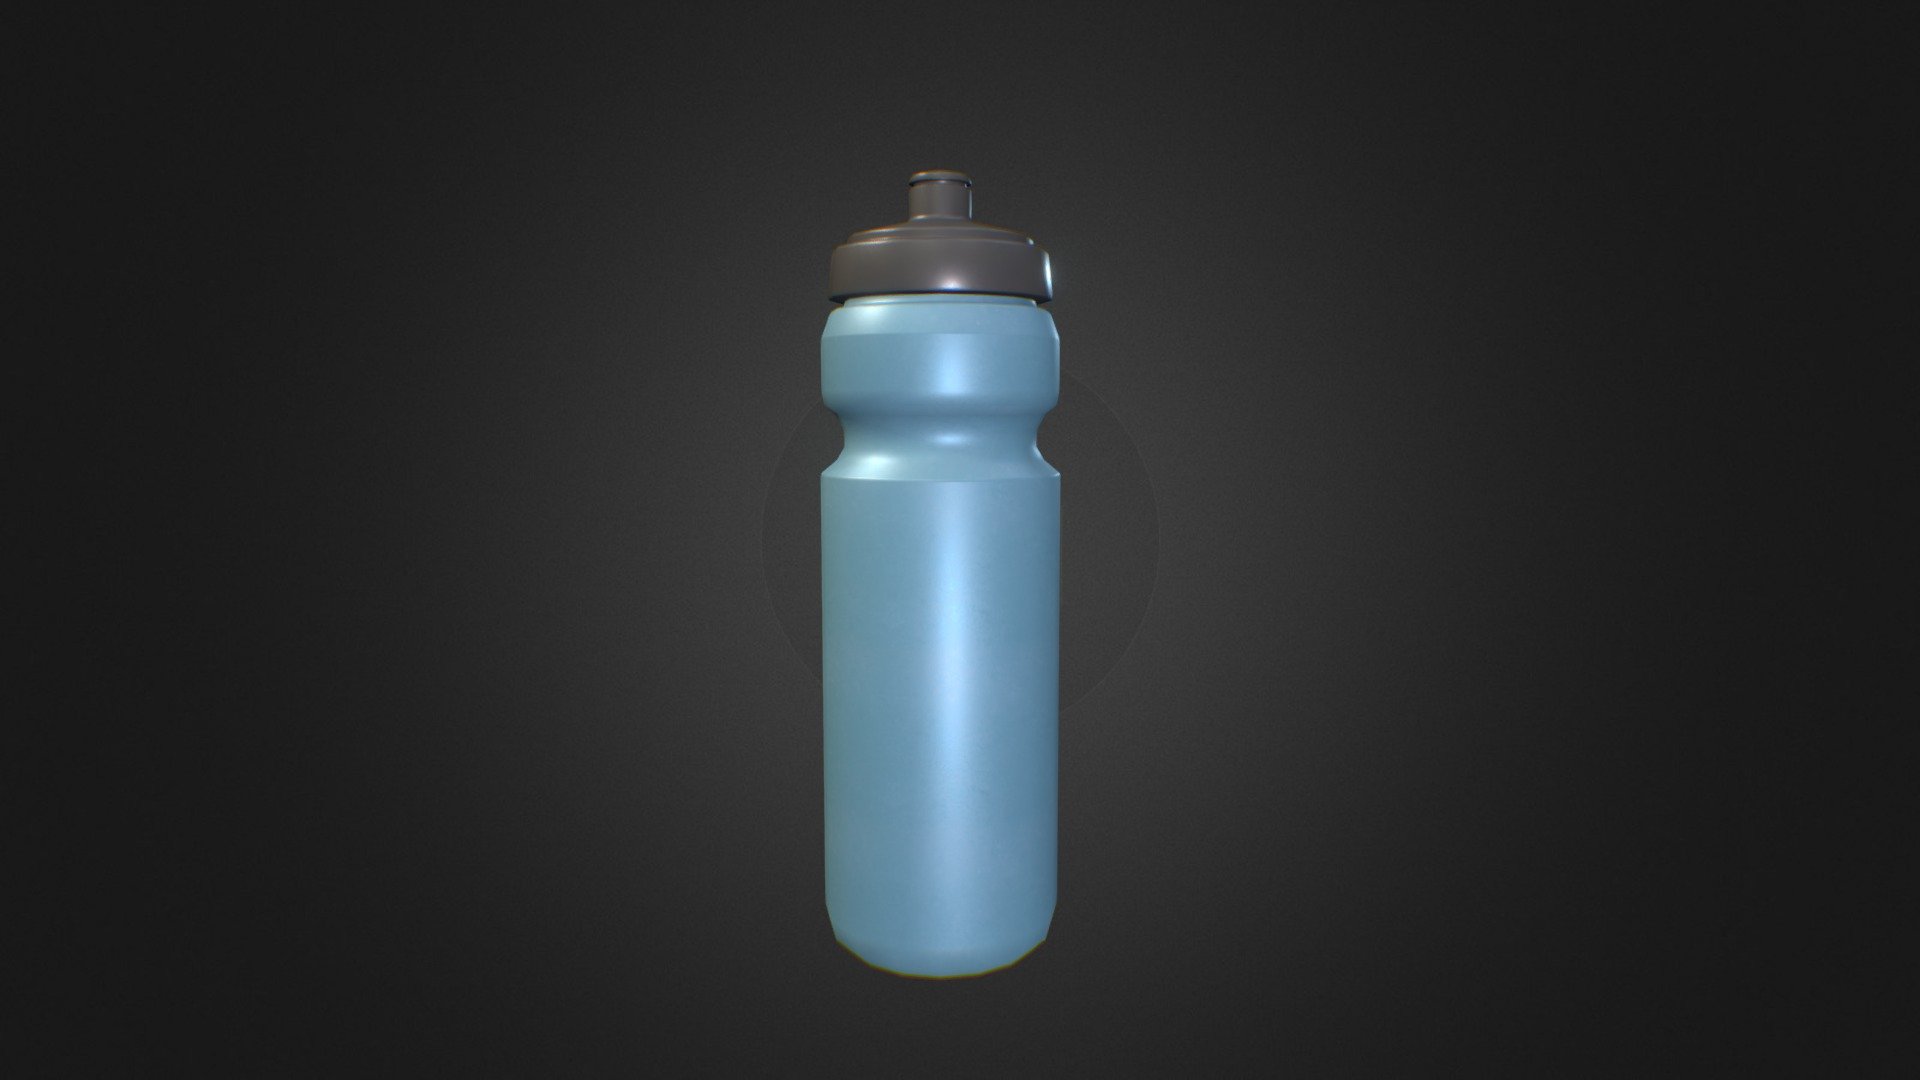 Here is a quick water bottle i created, not much but hope you like it :P. Took meh 1 hour but was worth it 3d model